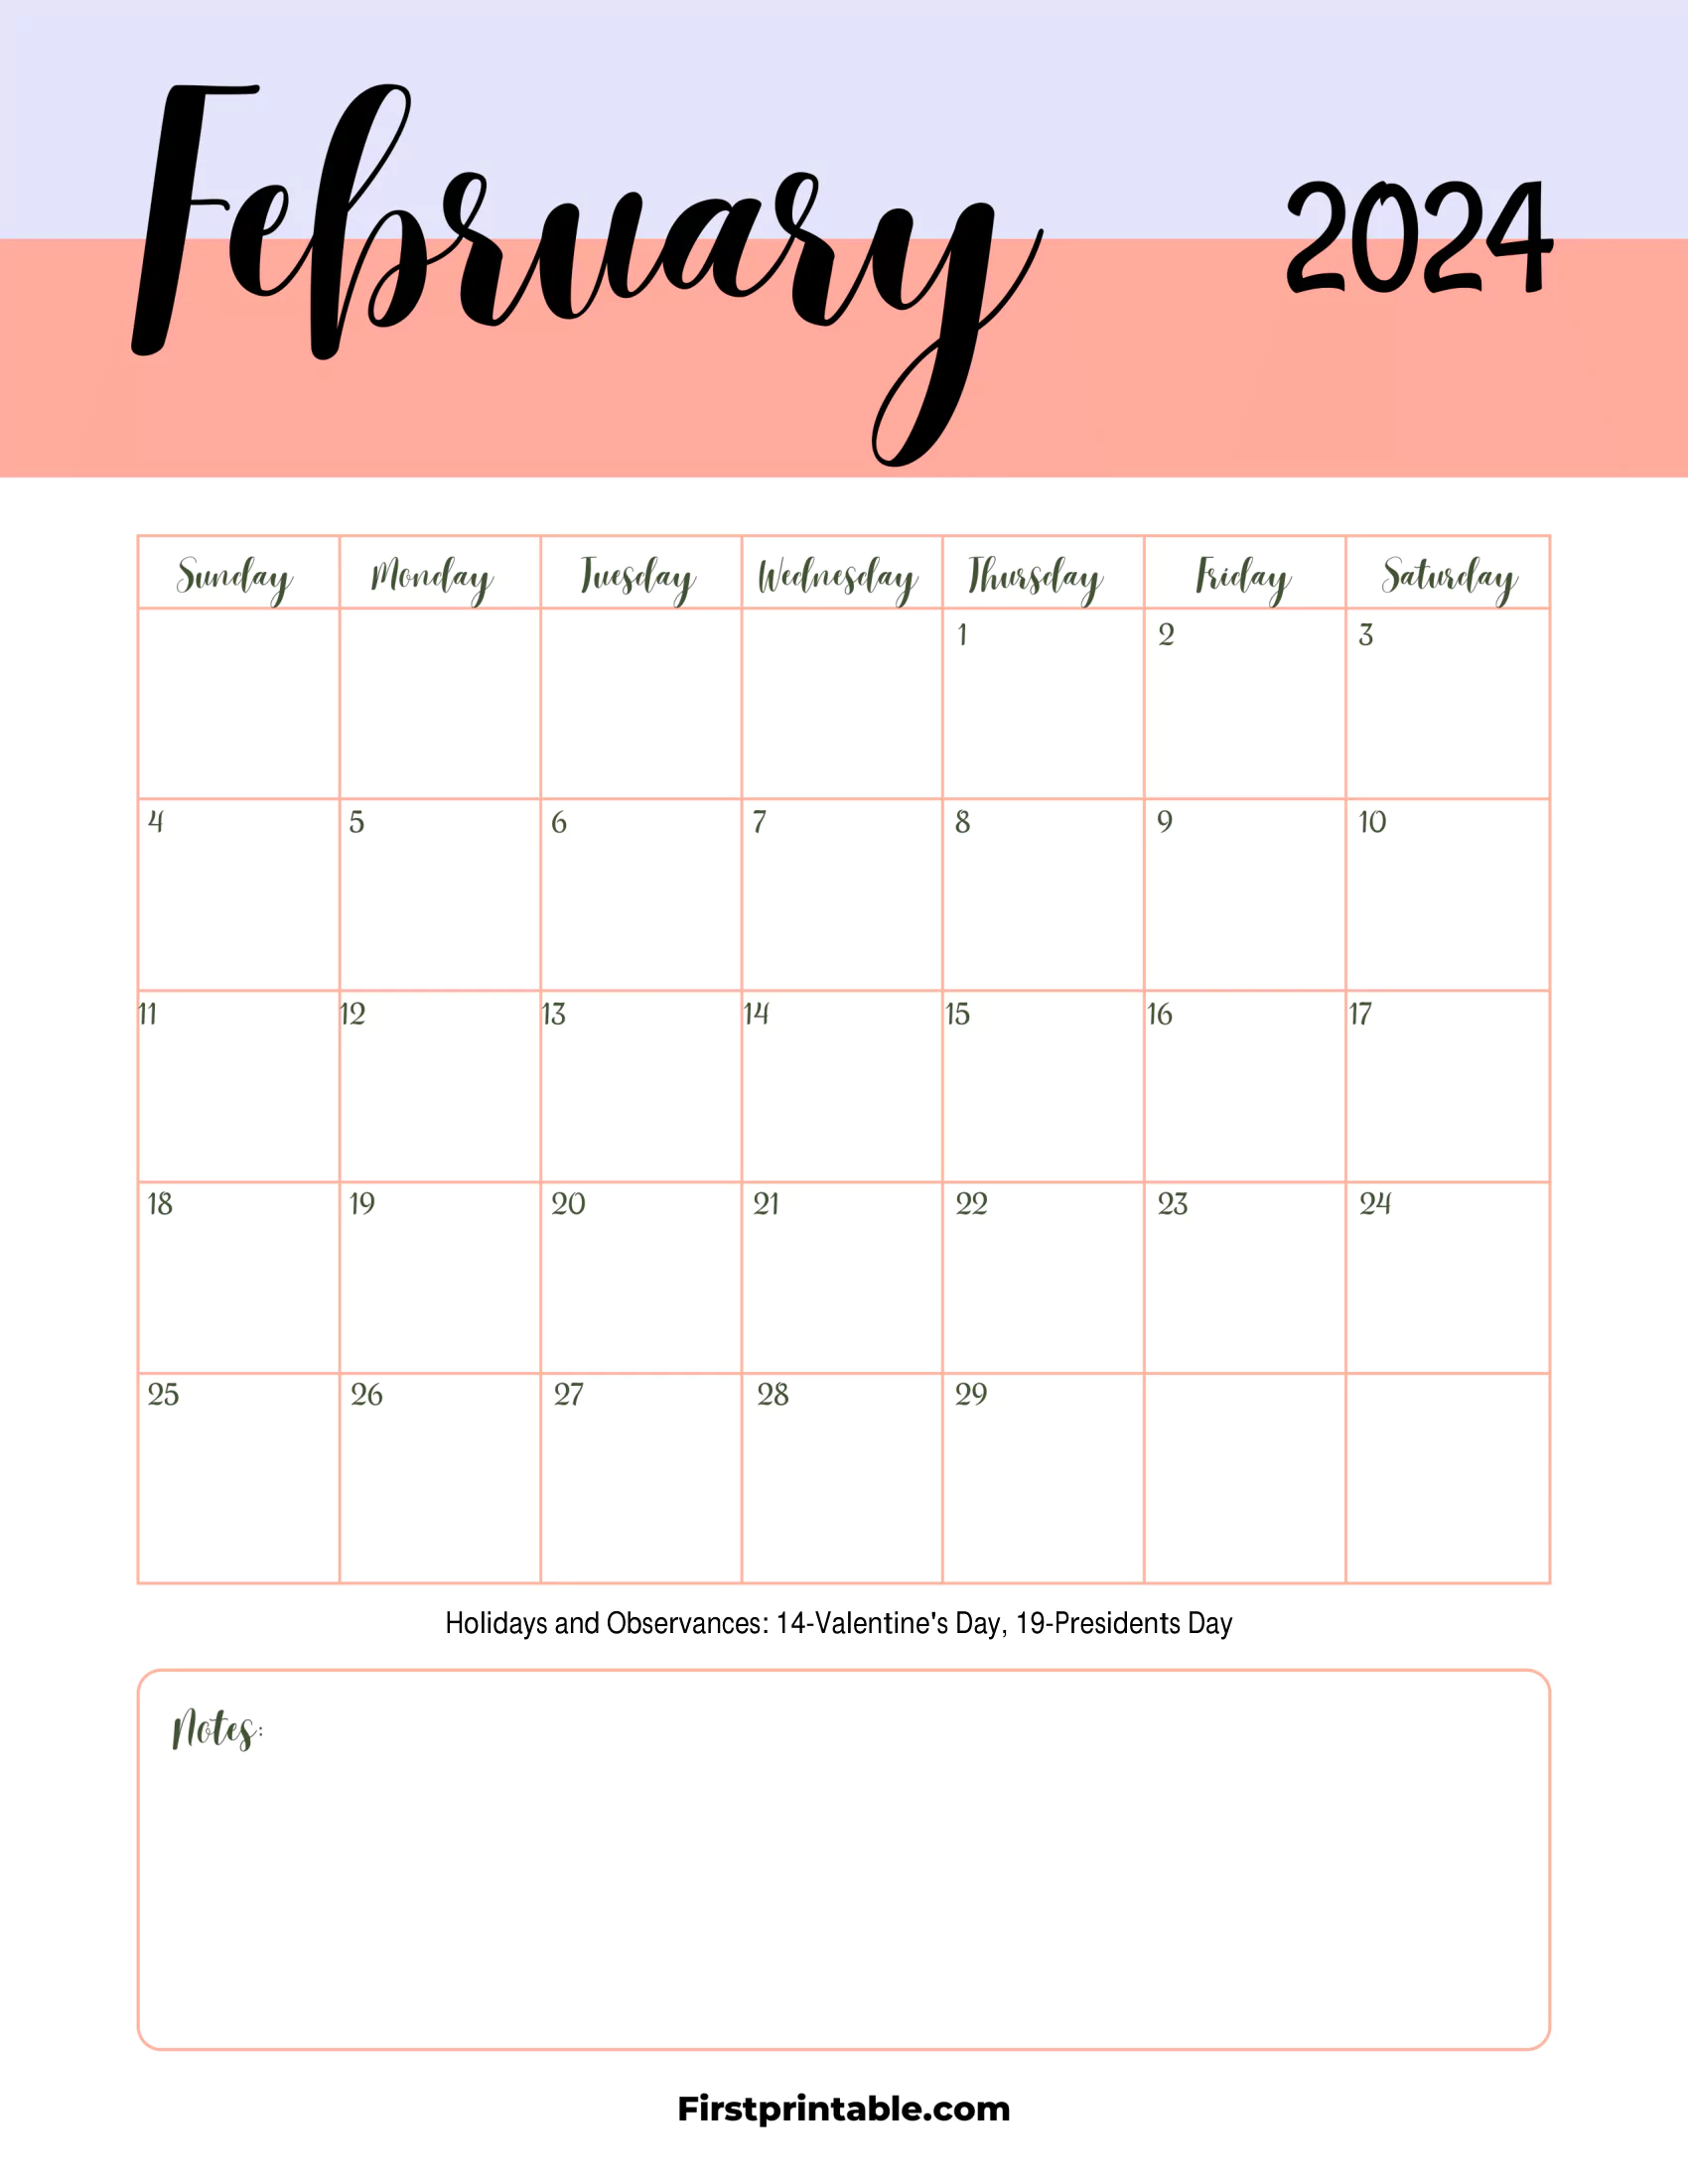 February Calendar 2024 Printable & Fillable with notes (With Holidays)